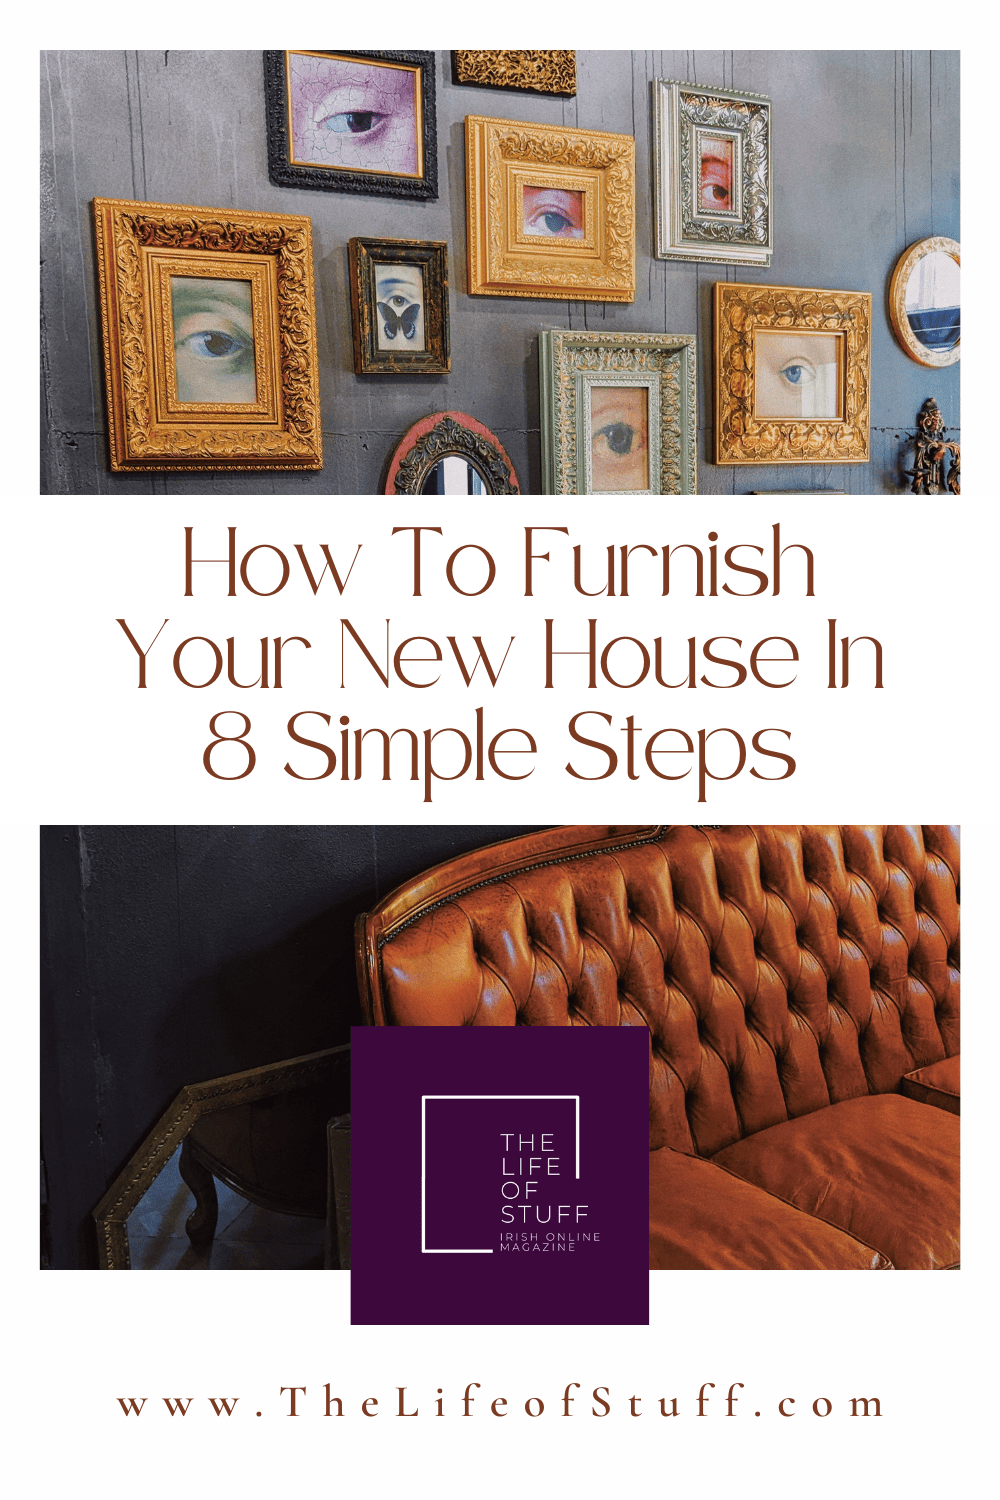 How To Furnish Your New House In 8 Simple Steps - The Life of Stuff